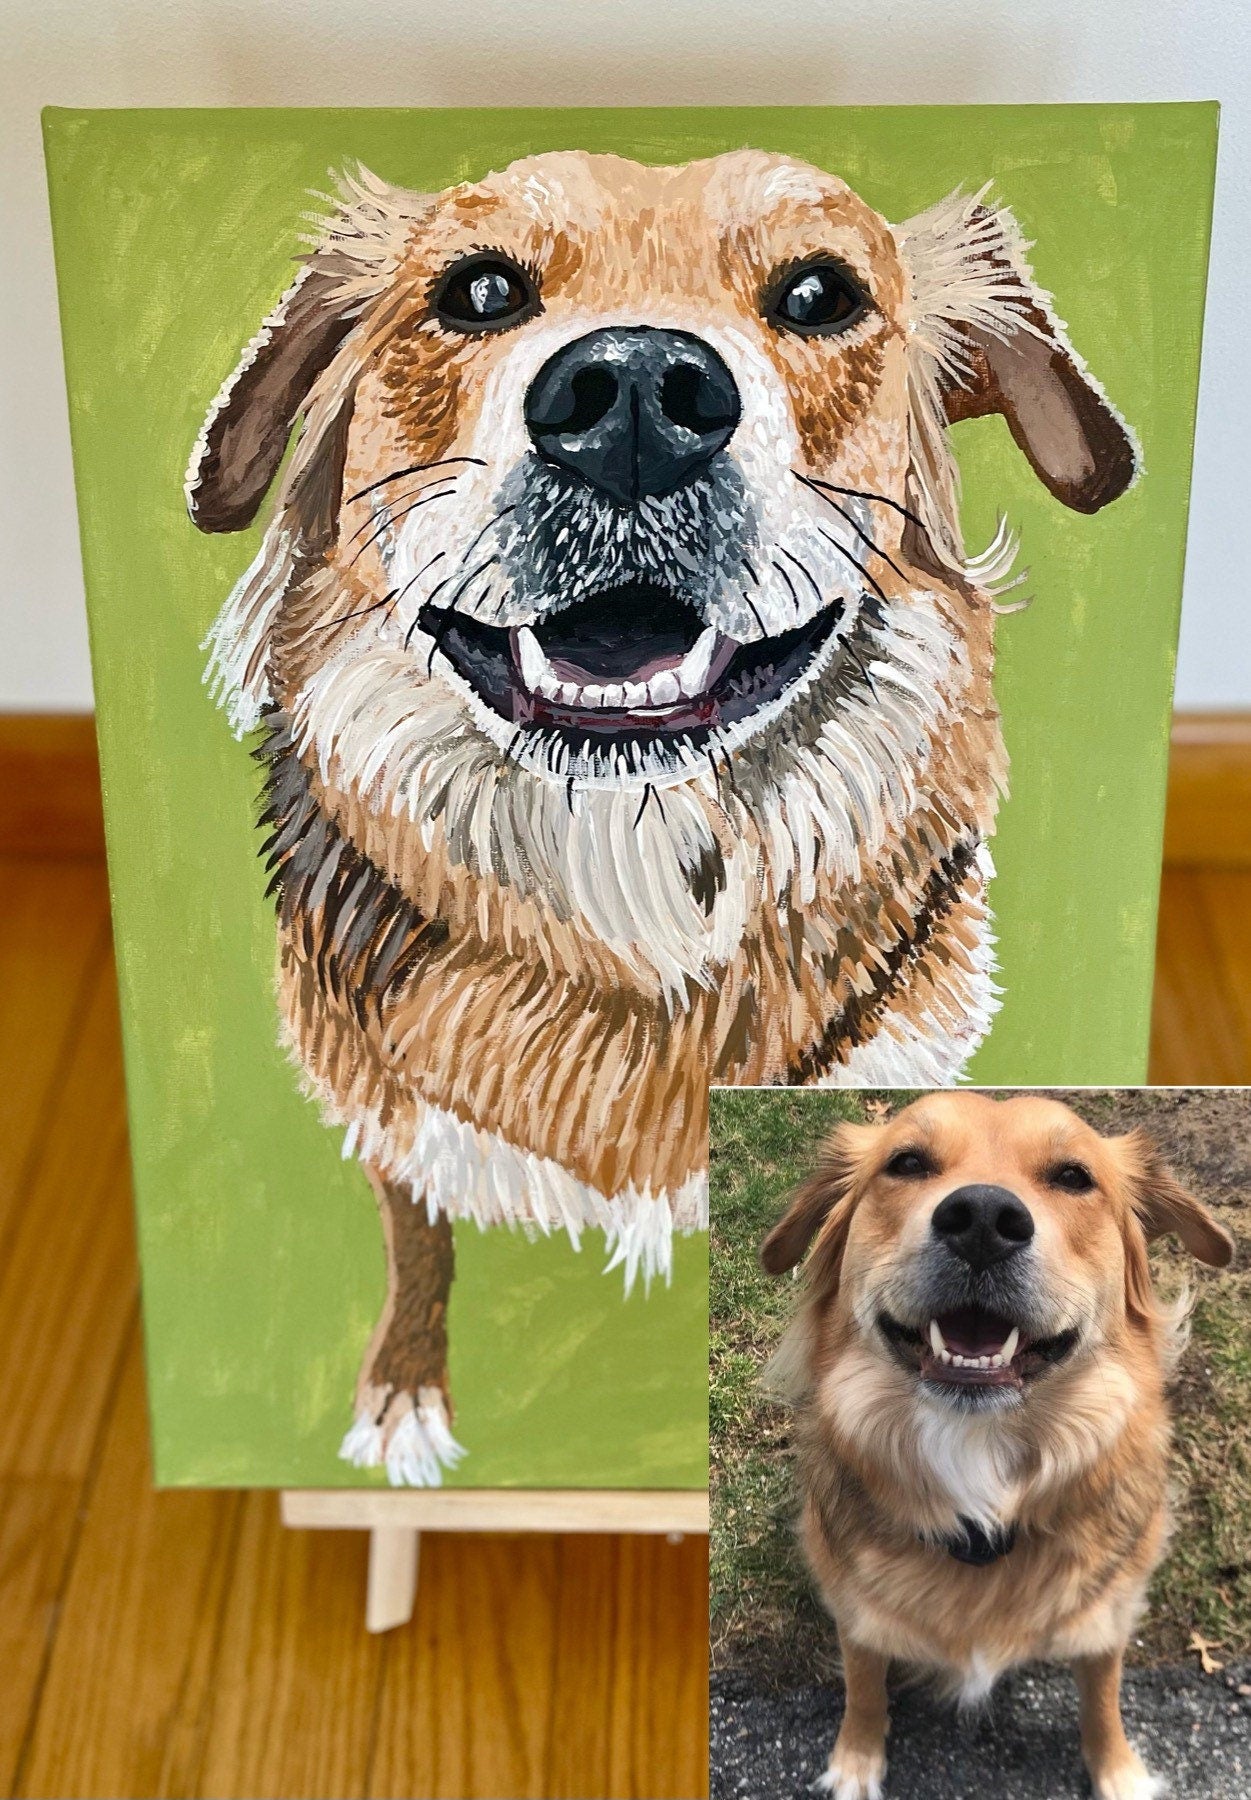 Ugg Boots Custom Hand Painted Dog Portrait Design with Your Dog or Cat Handpainted on Them. Puppy or Adult or Both. You Help to Design Them